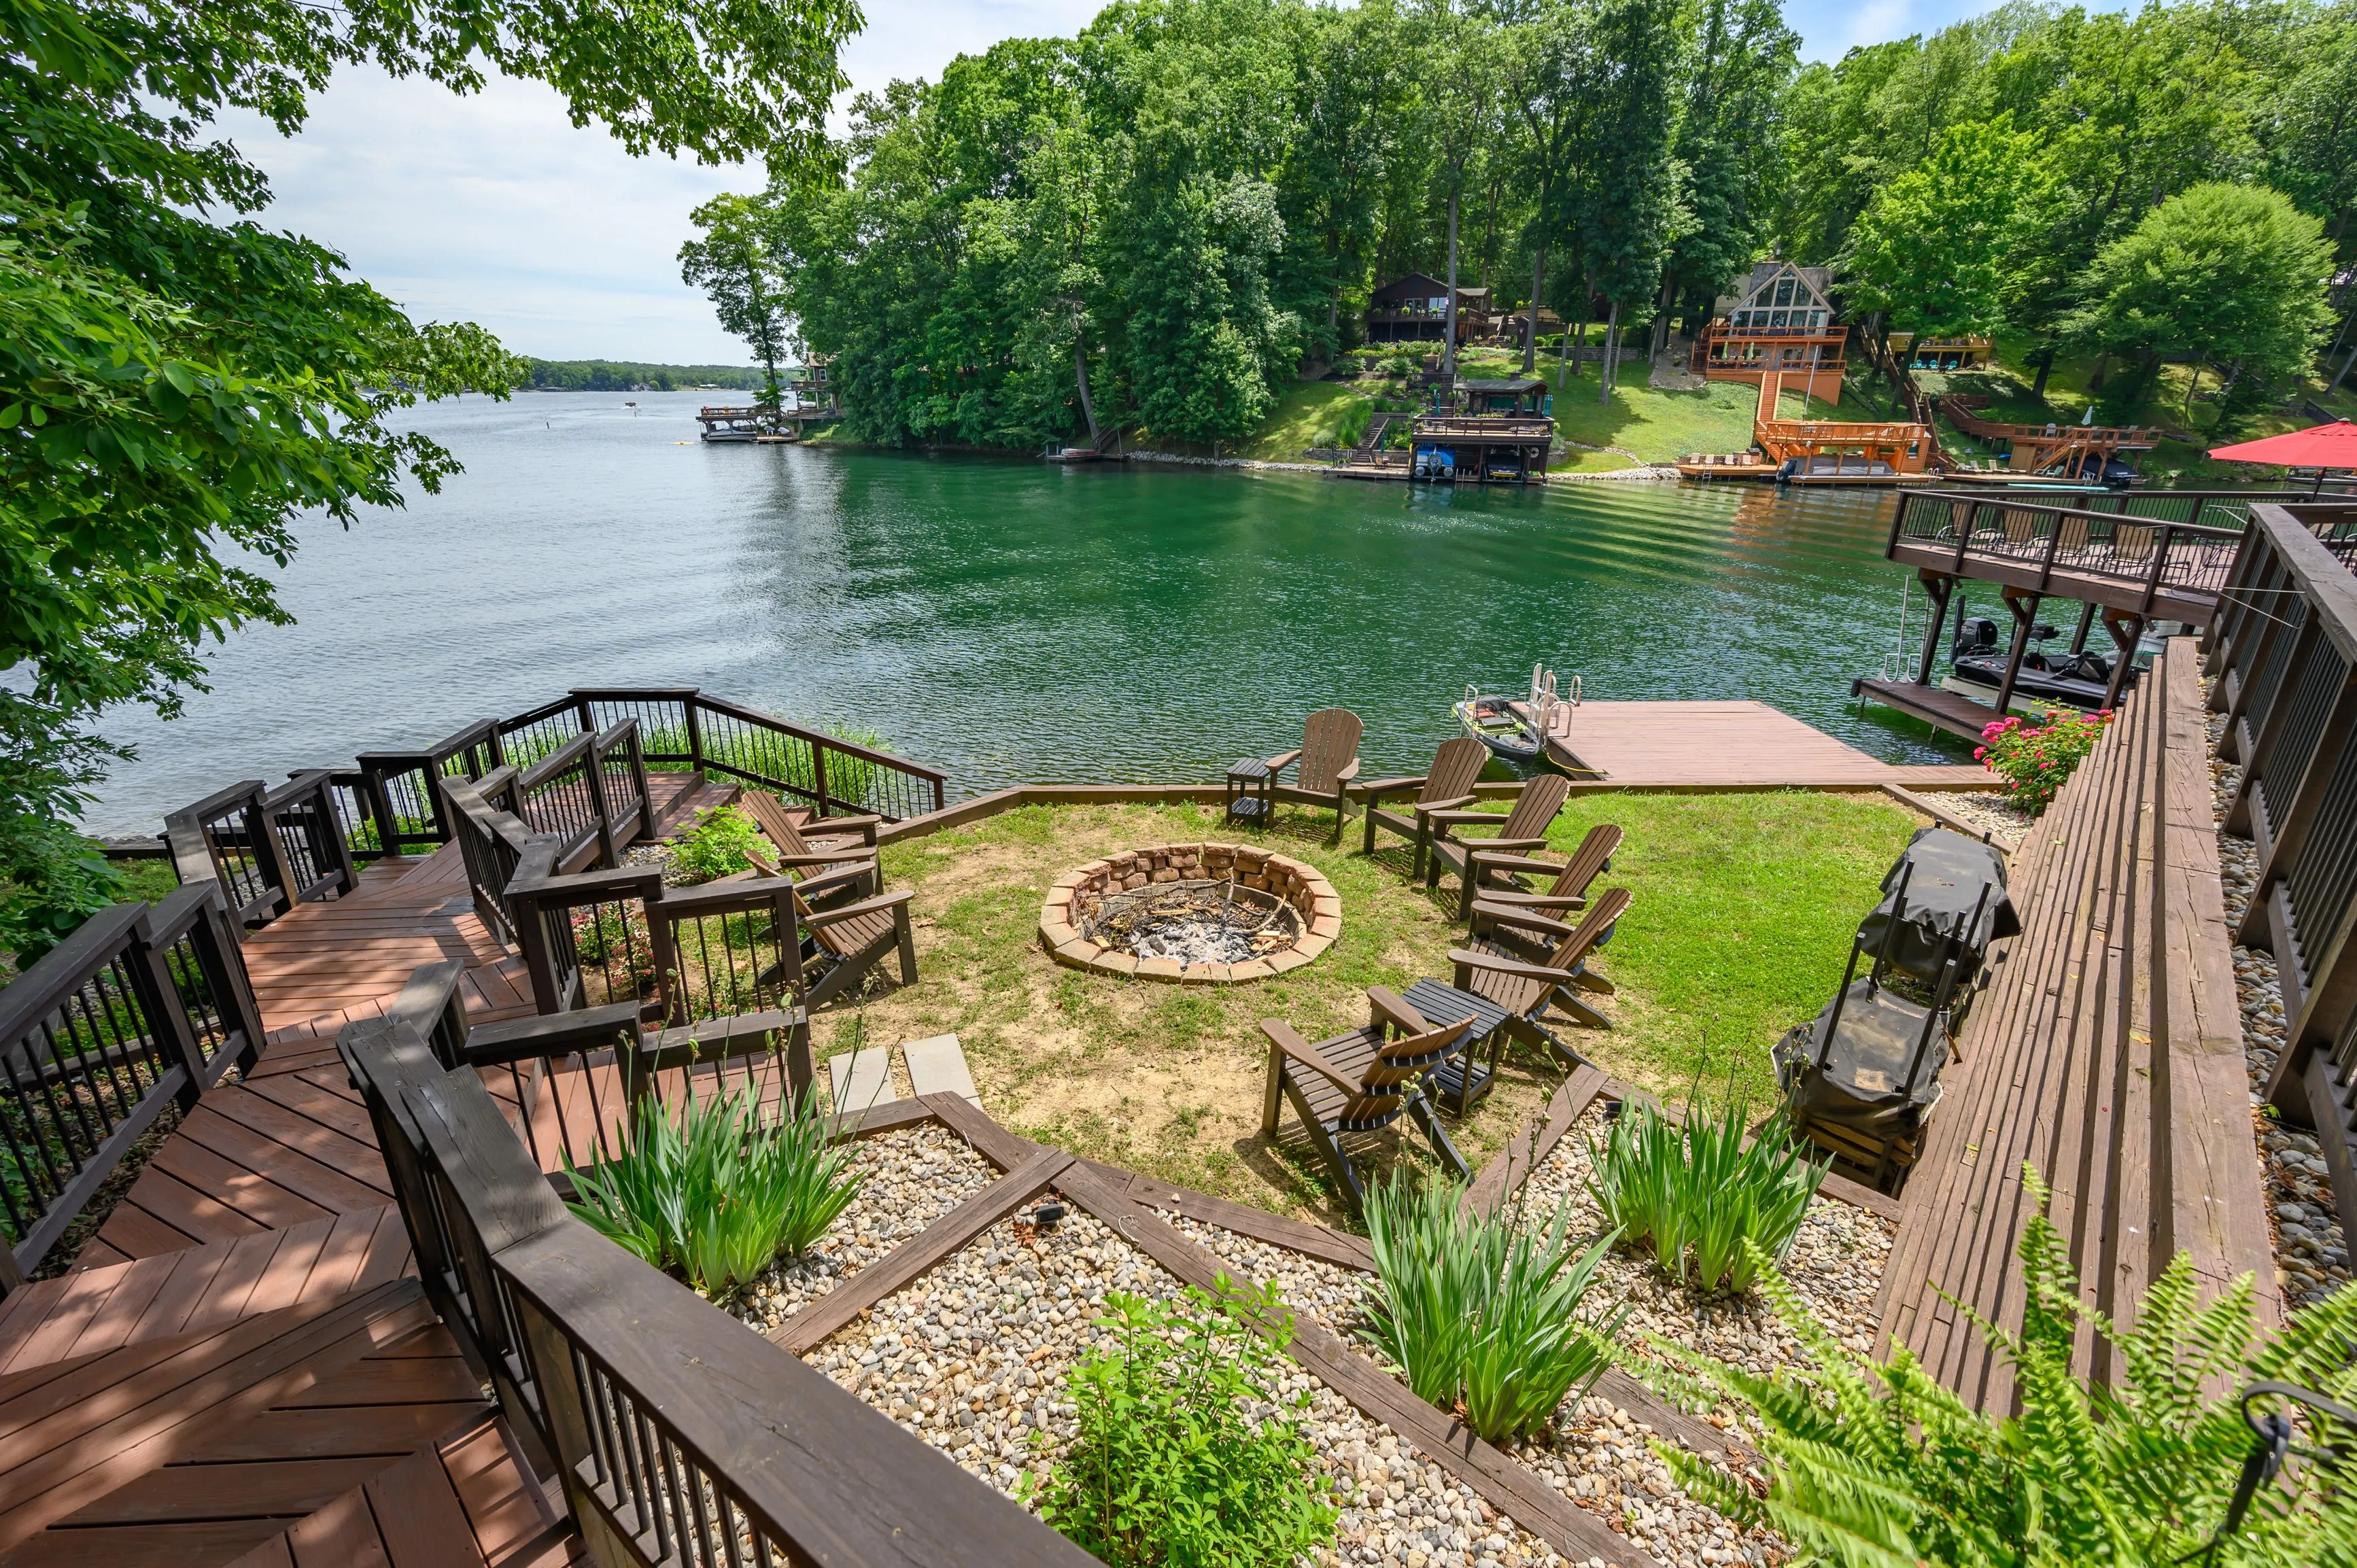 Lakeside backyard with a fire pit, seating area, and wooden stairs leading down to a dock.